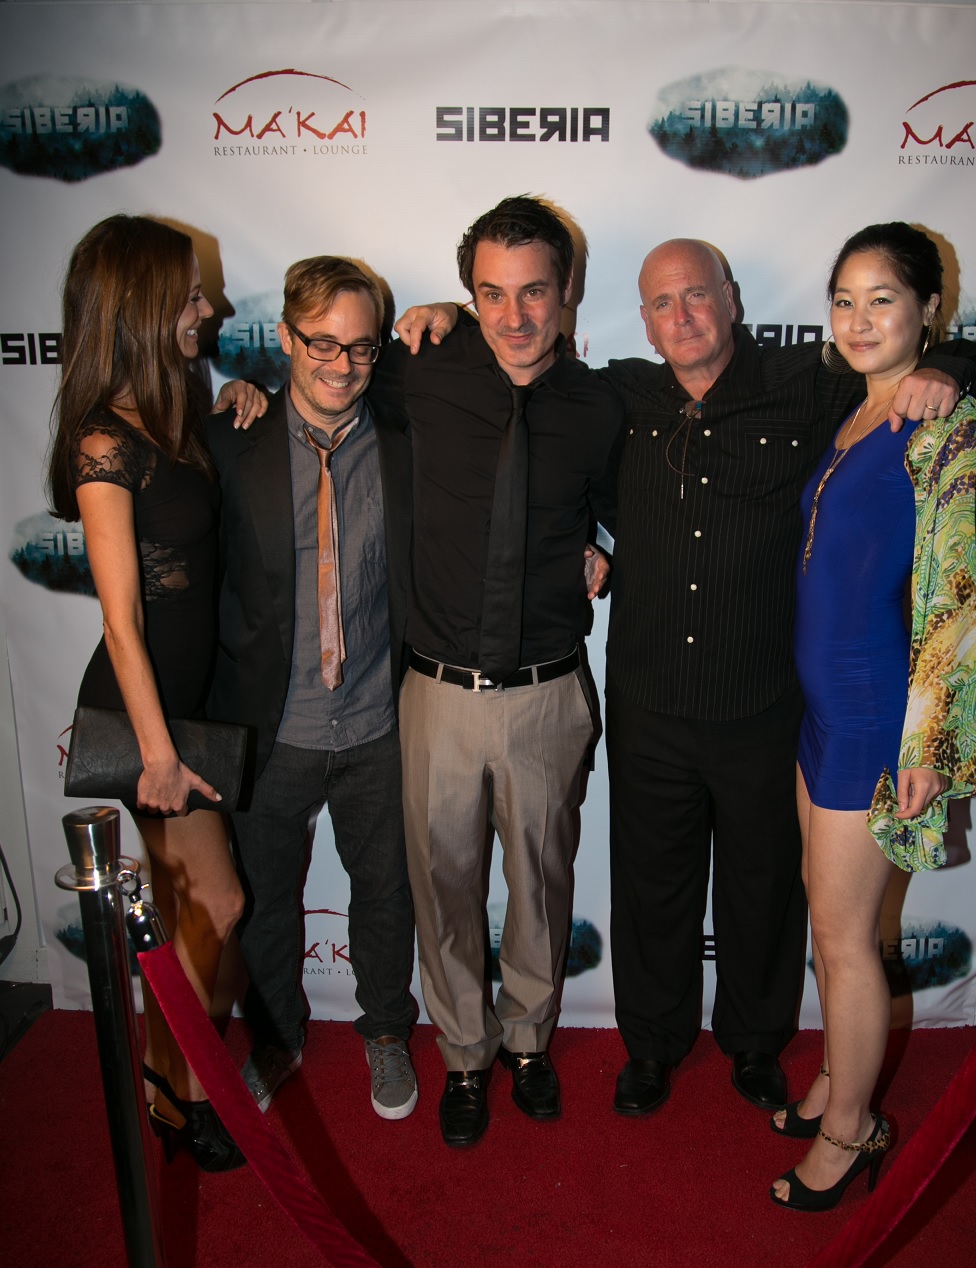 Irene Yee, Matthew Arnold, Esther Anderson, and Sam Dobbins at event for Siberia